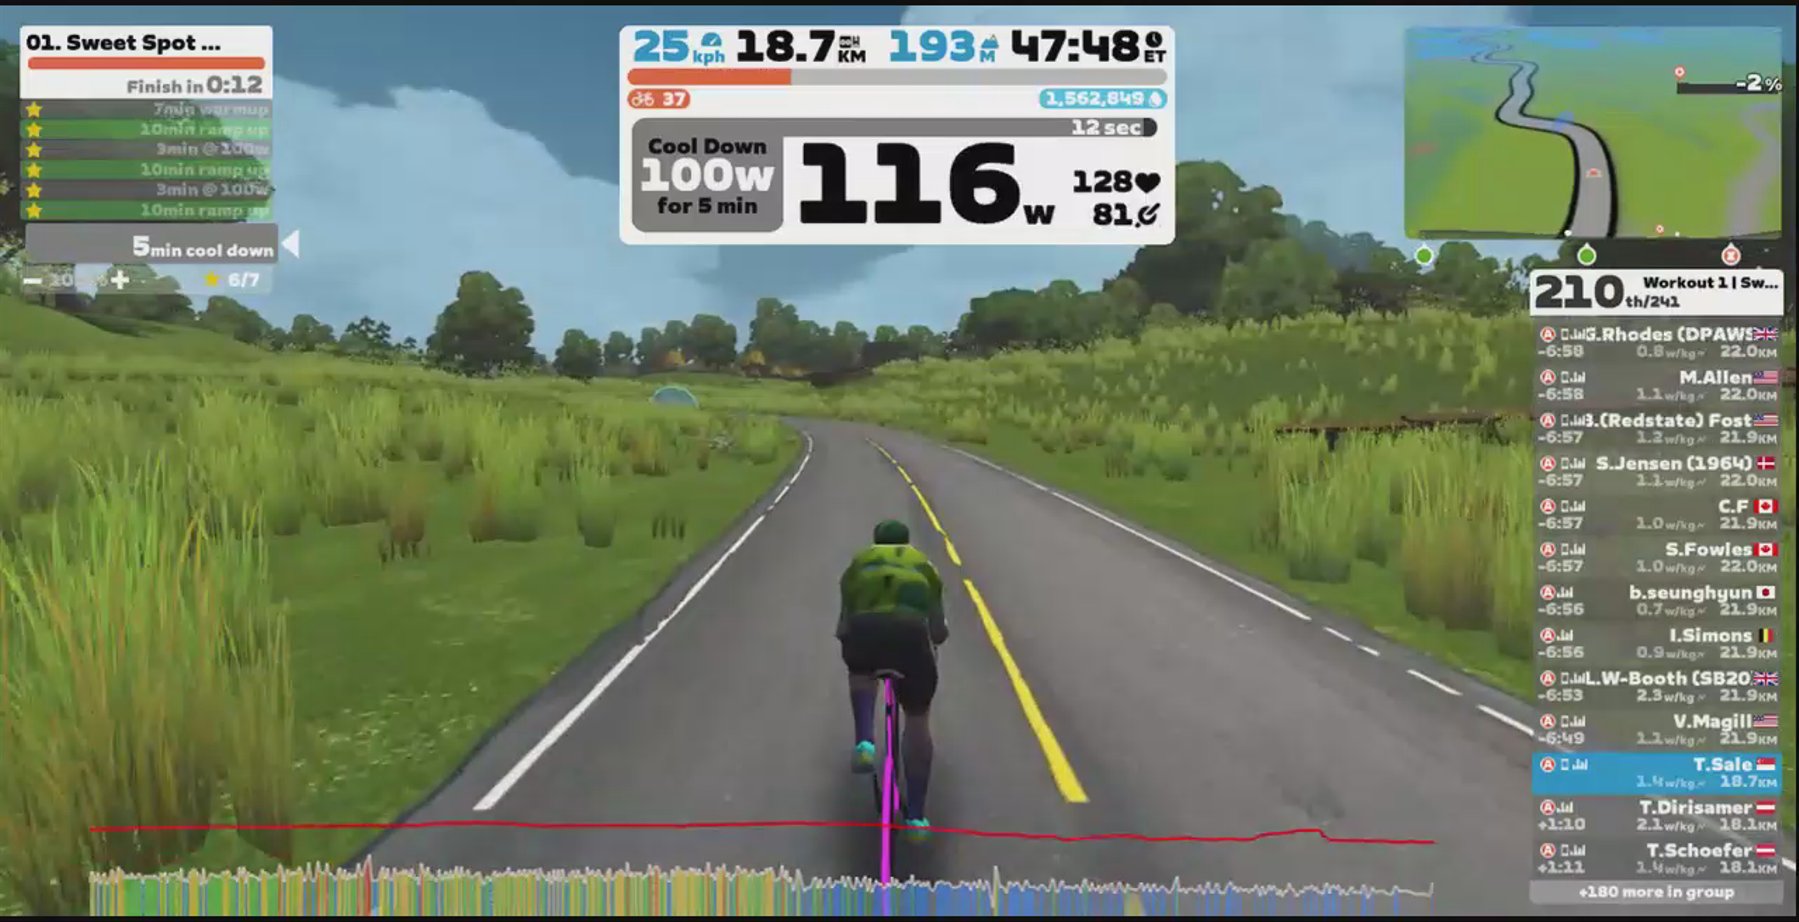 Zwift - Group Workout: Long - Sweet Spot Foundation  on Countryside Tour in Makuri Islands